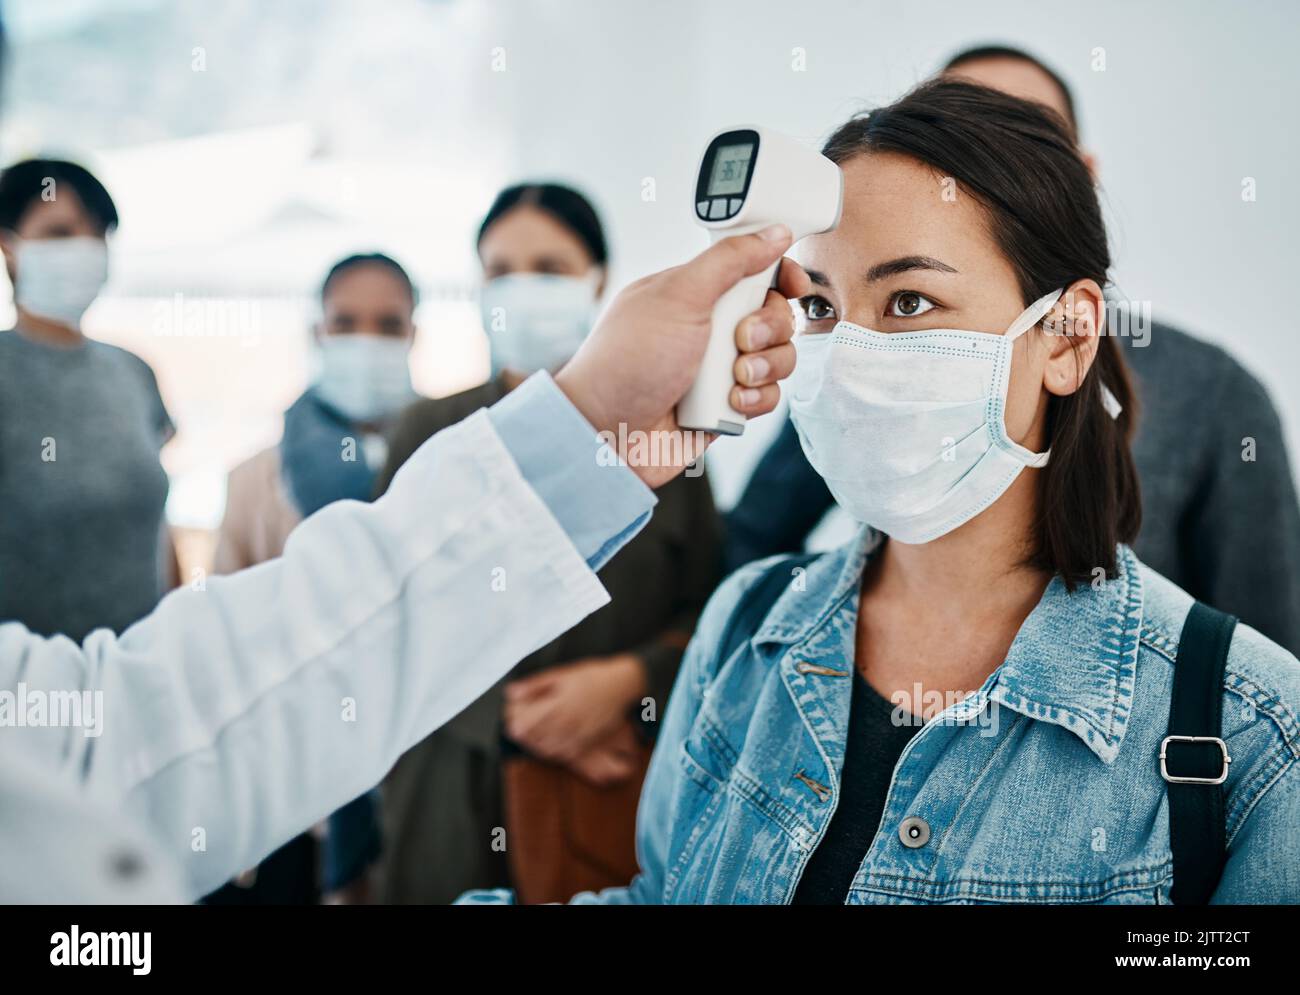 Covid screening with a female tourist in a mask having her temperature taken with an infrared thermometer while waiting to board in an airport. Travel Stock Photo